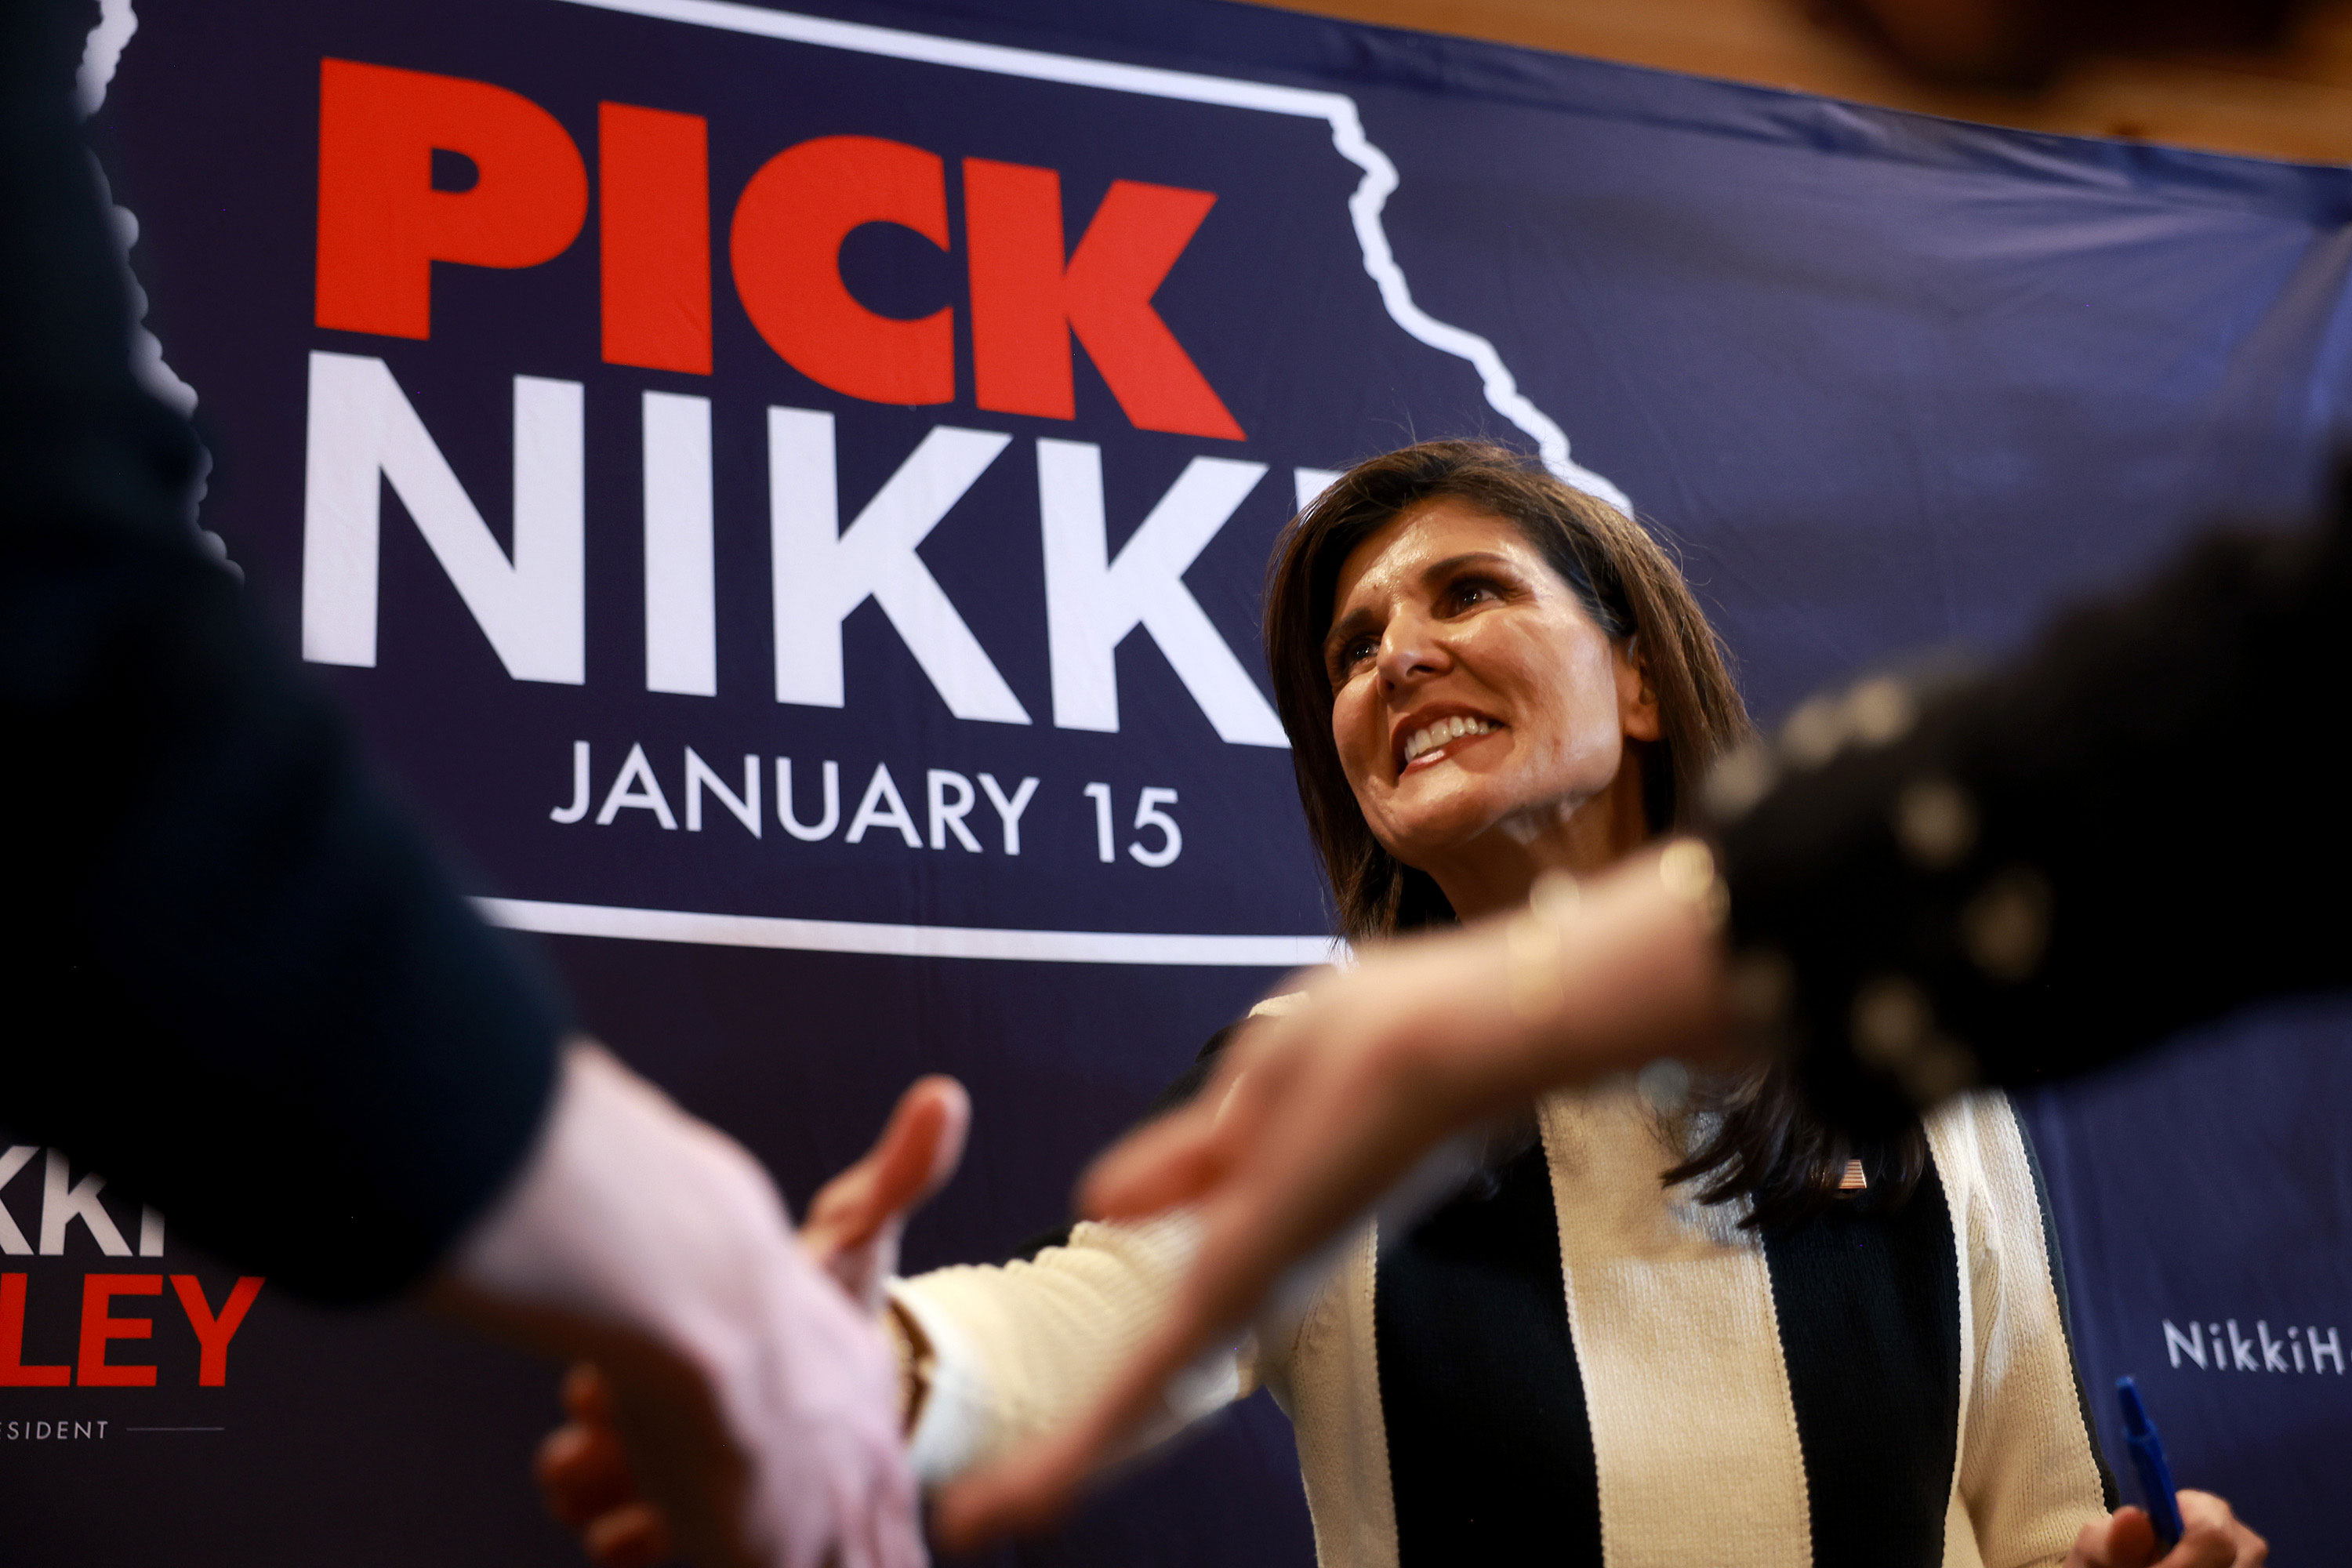 Republican presidential candidate Nikki Haley greets attendees during a campaign event in Adel, Iowa, on Sunday.